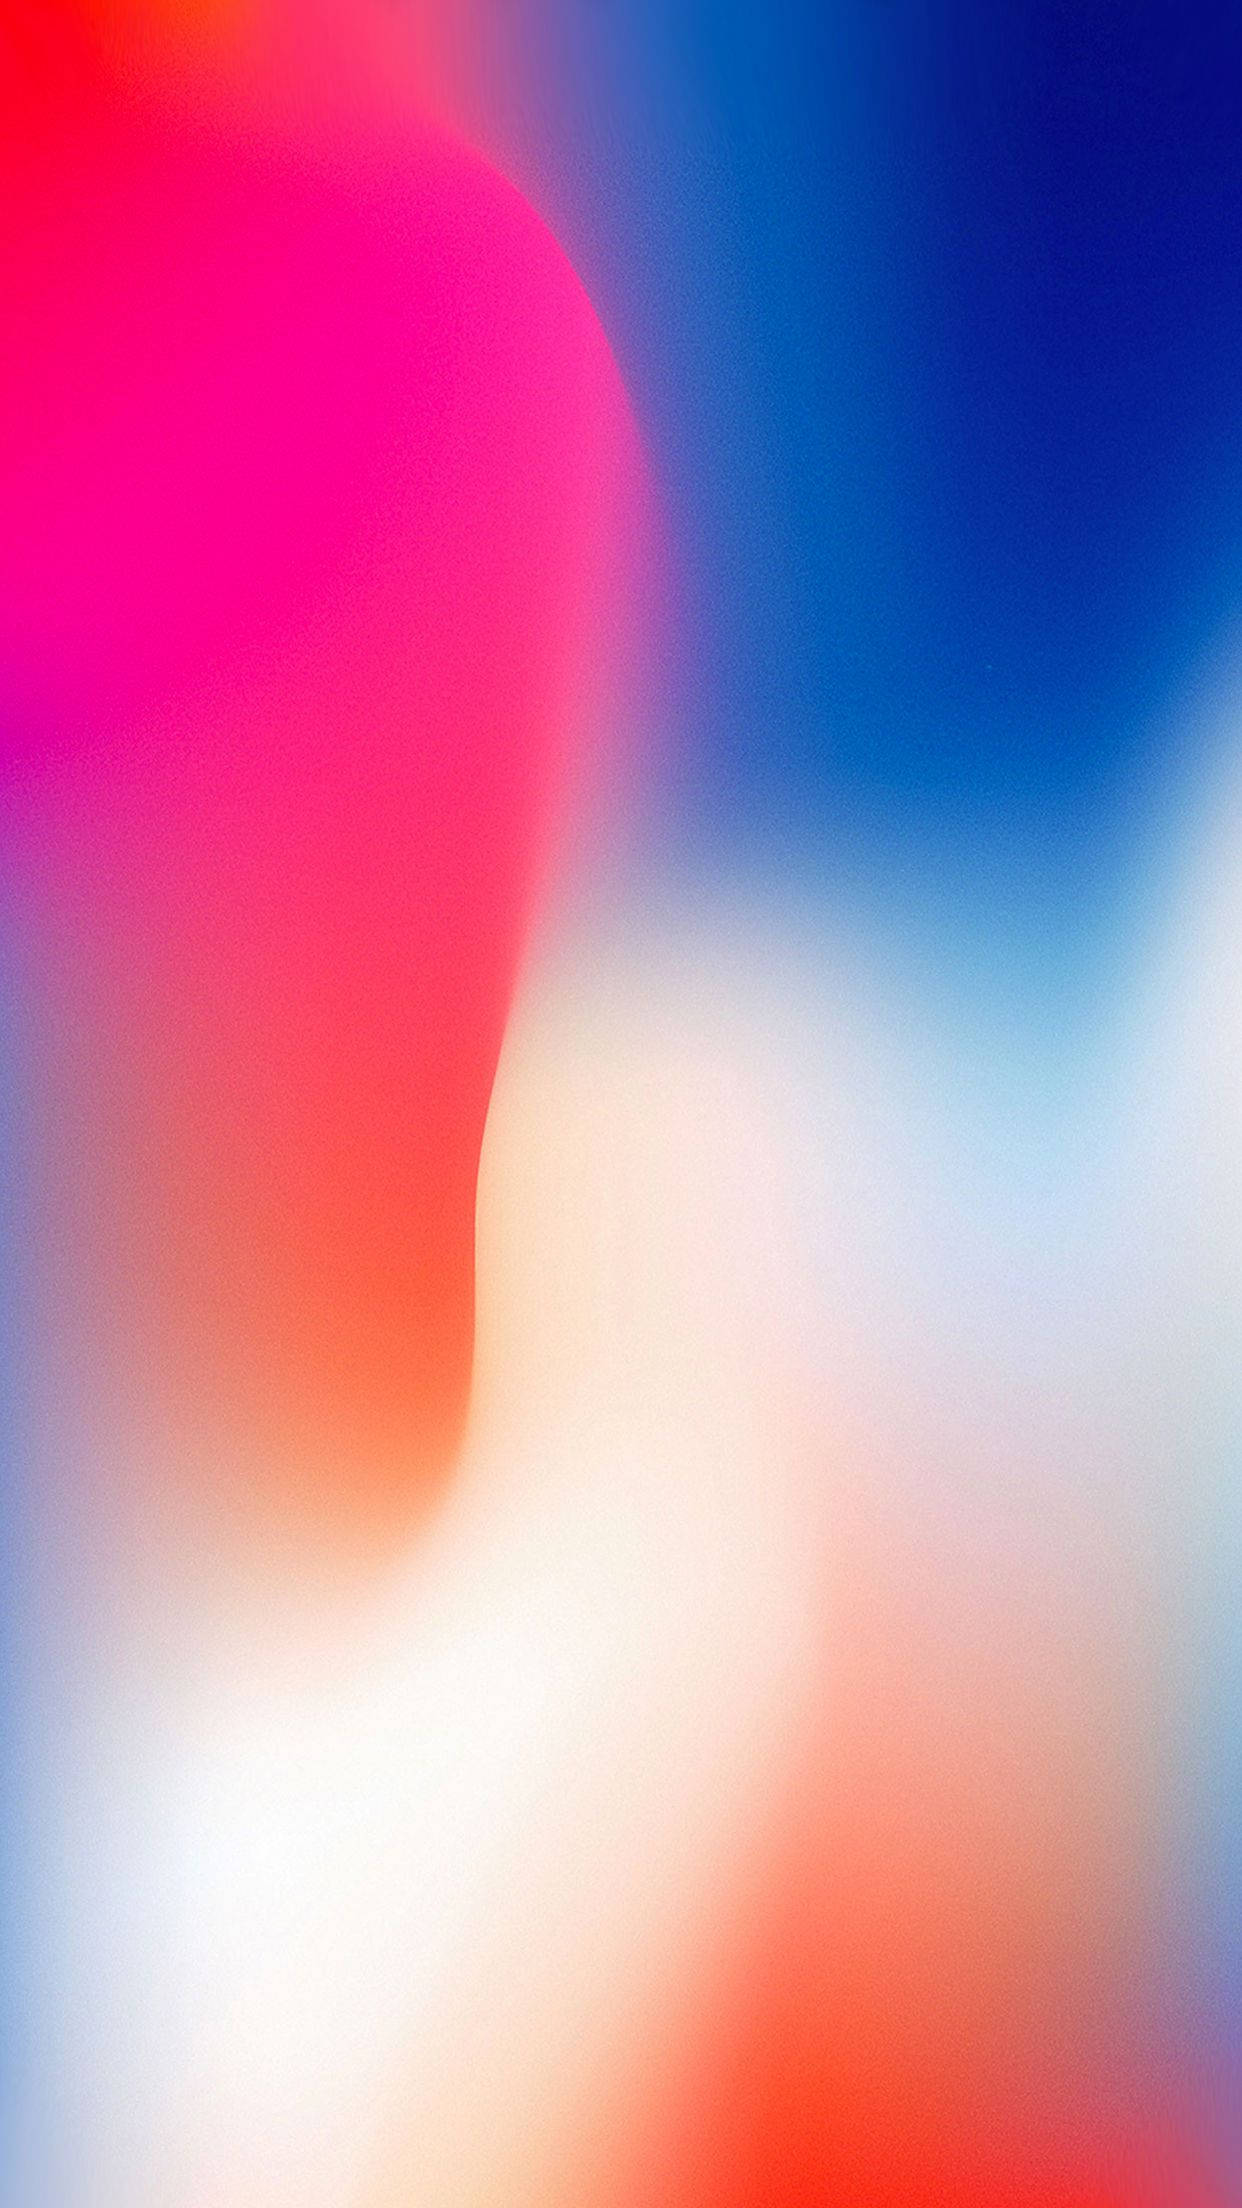 An Iphone X With A Colorful Background Background